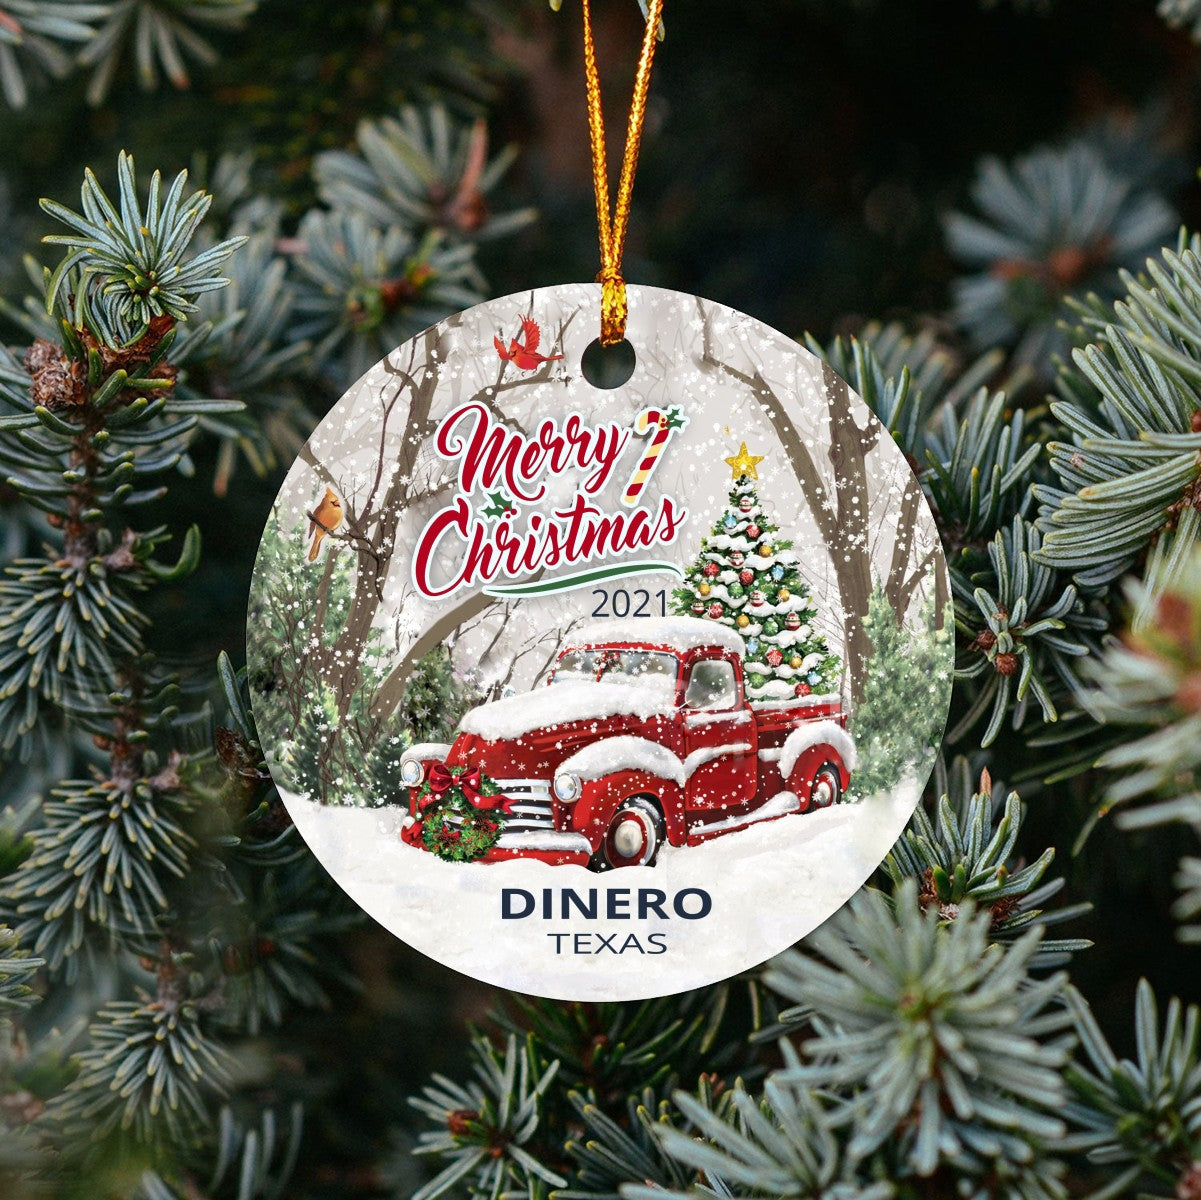 Christmas Tree Ornaments Dinero - Ornament With Name City, State Dinero Texas TX Ornament - Red Truck Xmas Ornaments 3'' Plastic Gift For Family, Friend And Housewarming